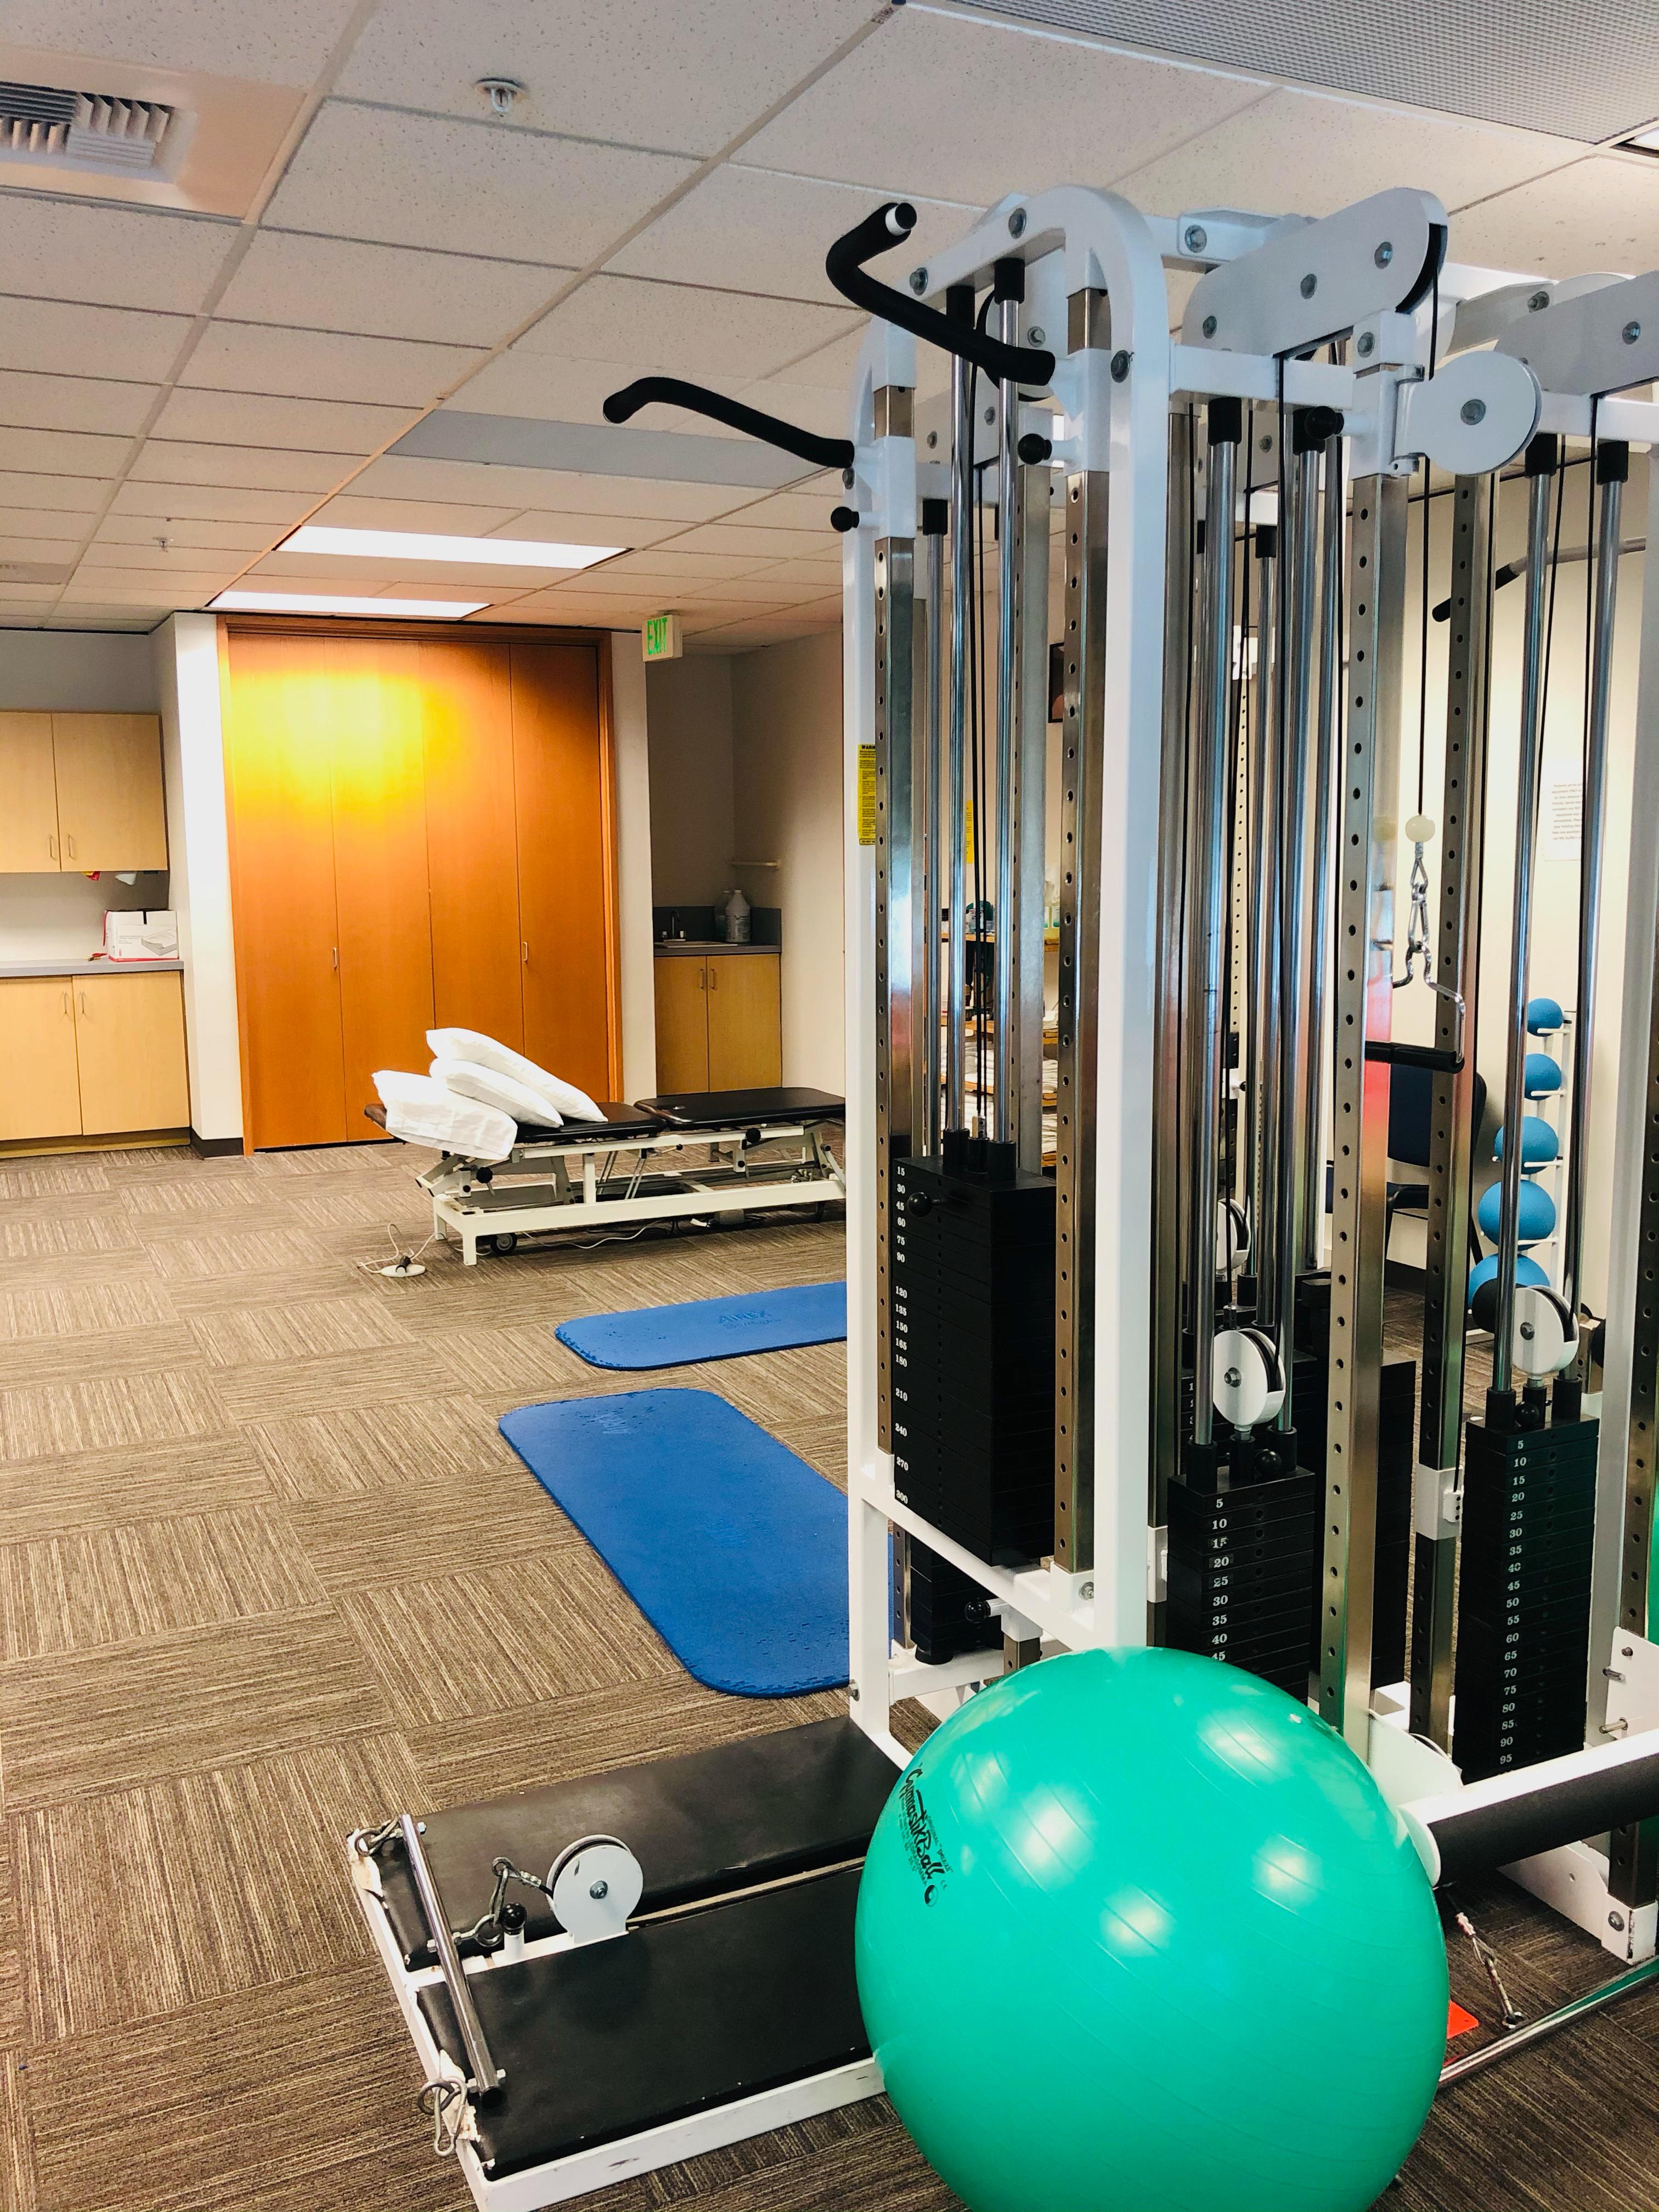 Summit Rehabilitation physical therapy clinic located at
12121 Harbour Reach Dr. in 
Mukilteo, Washington